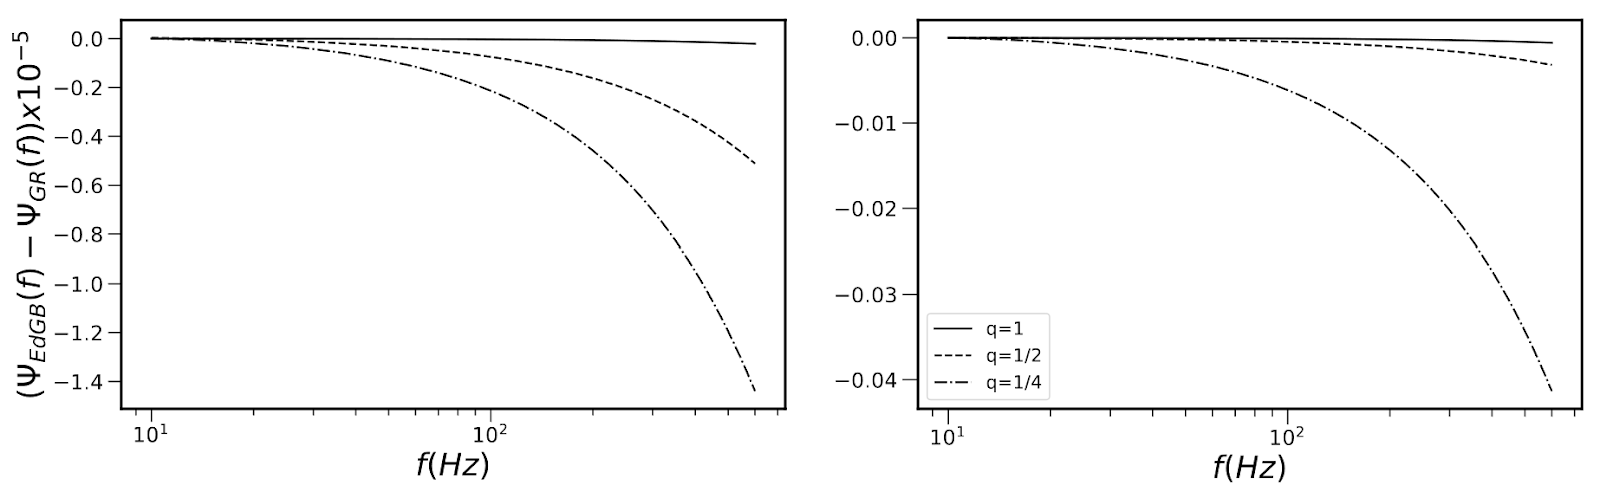 Two plots showing q = 1, q= 0.5 and q=0.25. In both plots, q=1 is a flat line, and q=0.25 drops exponentially. q=0.5 is in between q=1 and q=0.25, but in the left plot q=0.5 is directly in between and the right plot q=0.5 is closer to q=1 than q=0.25 